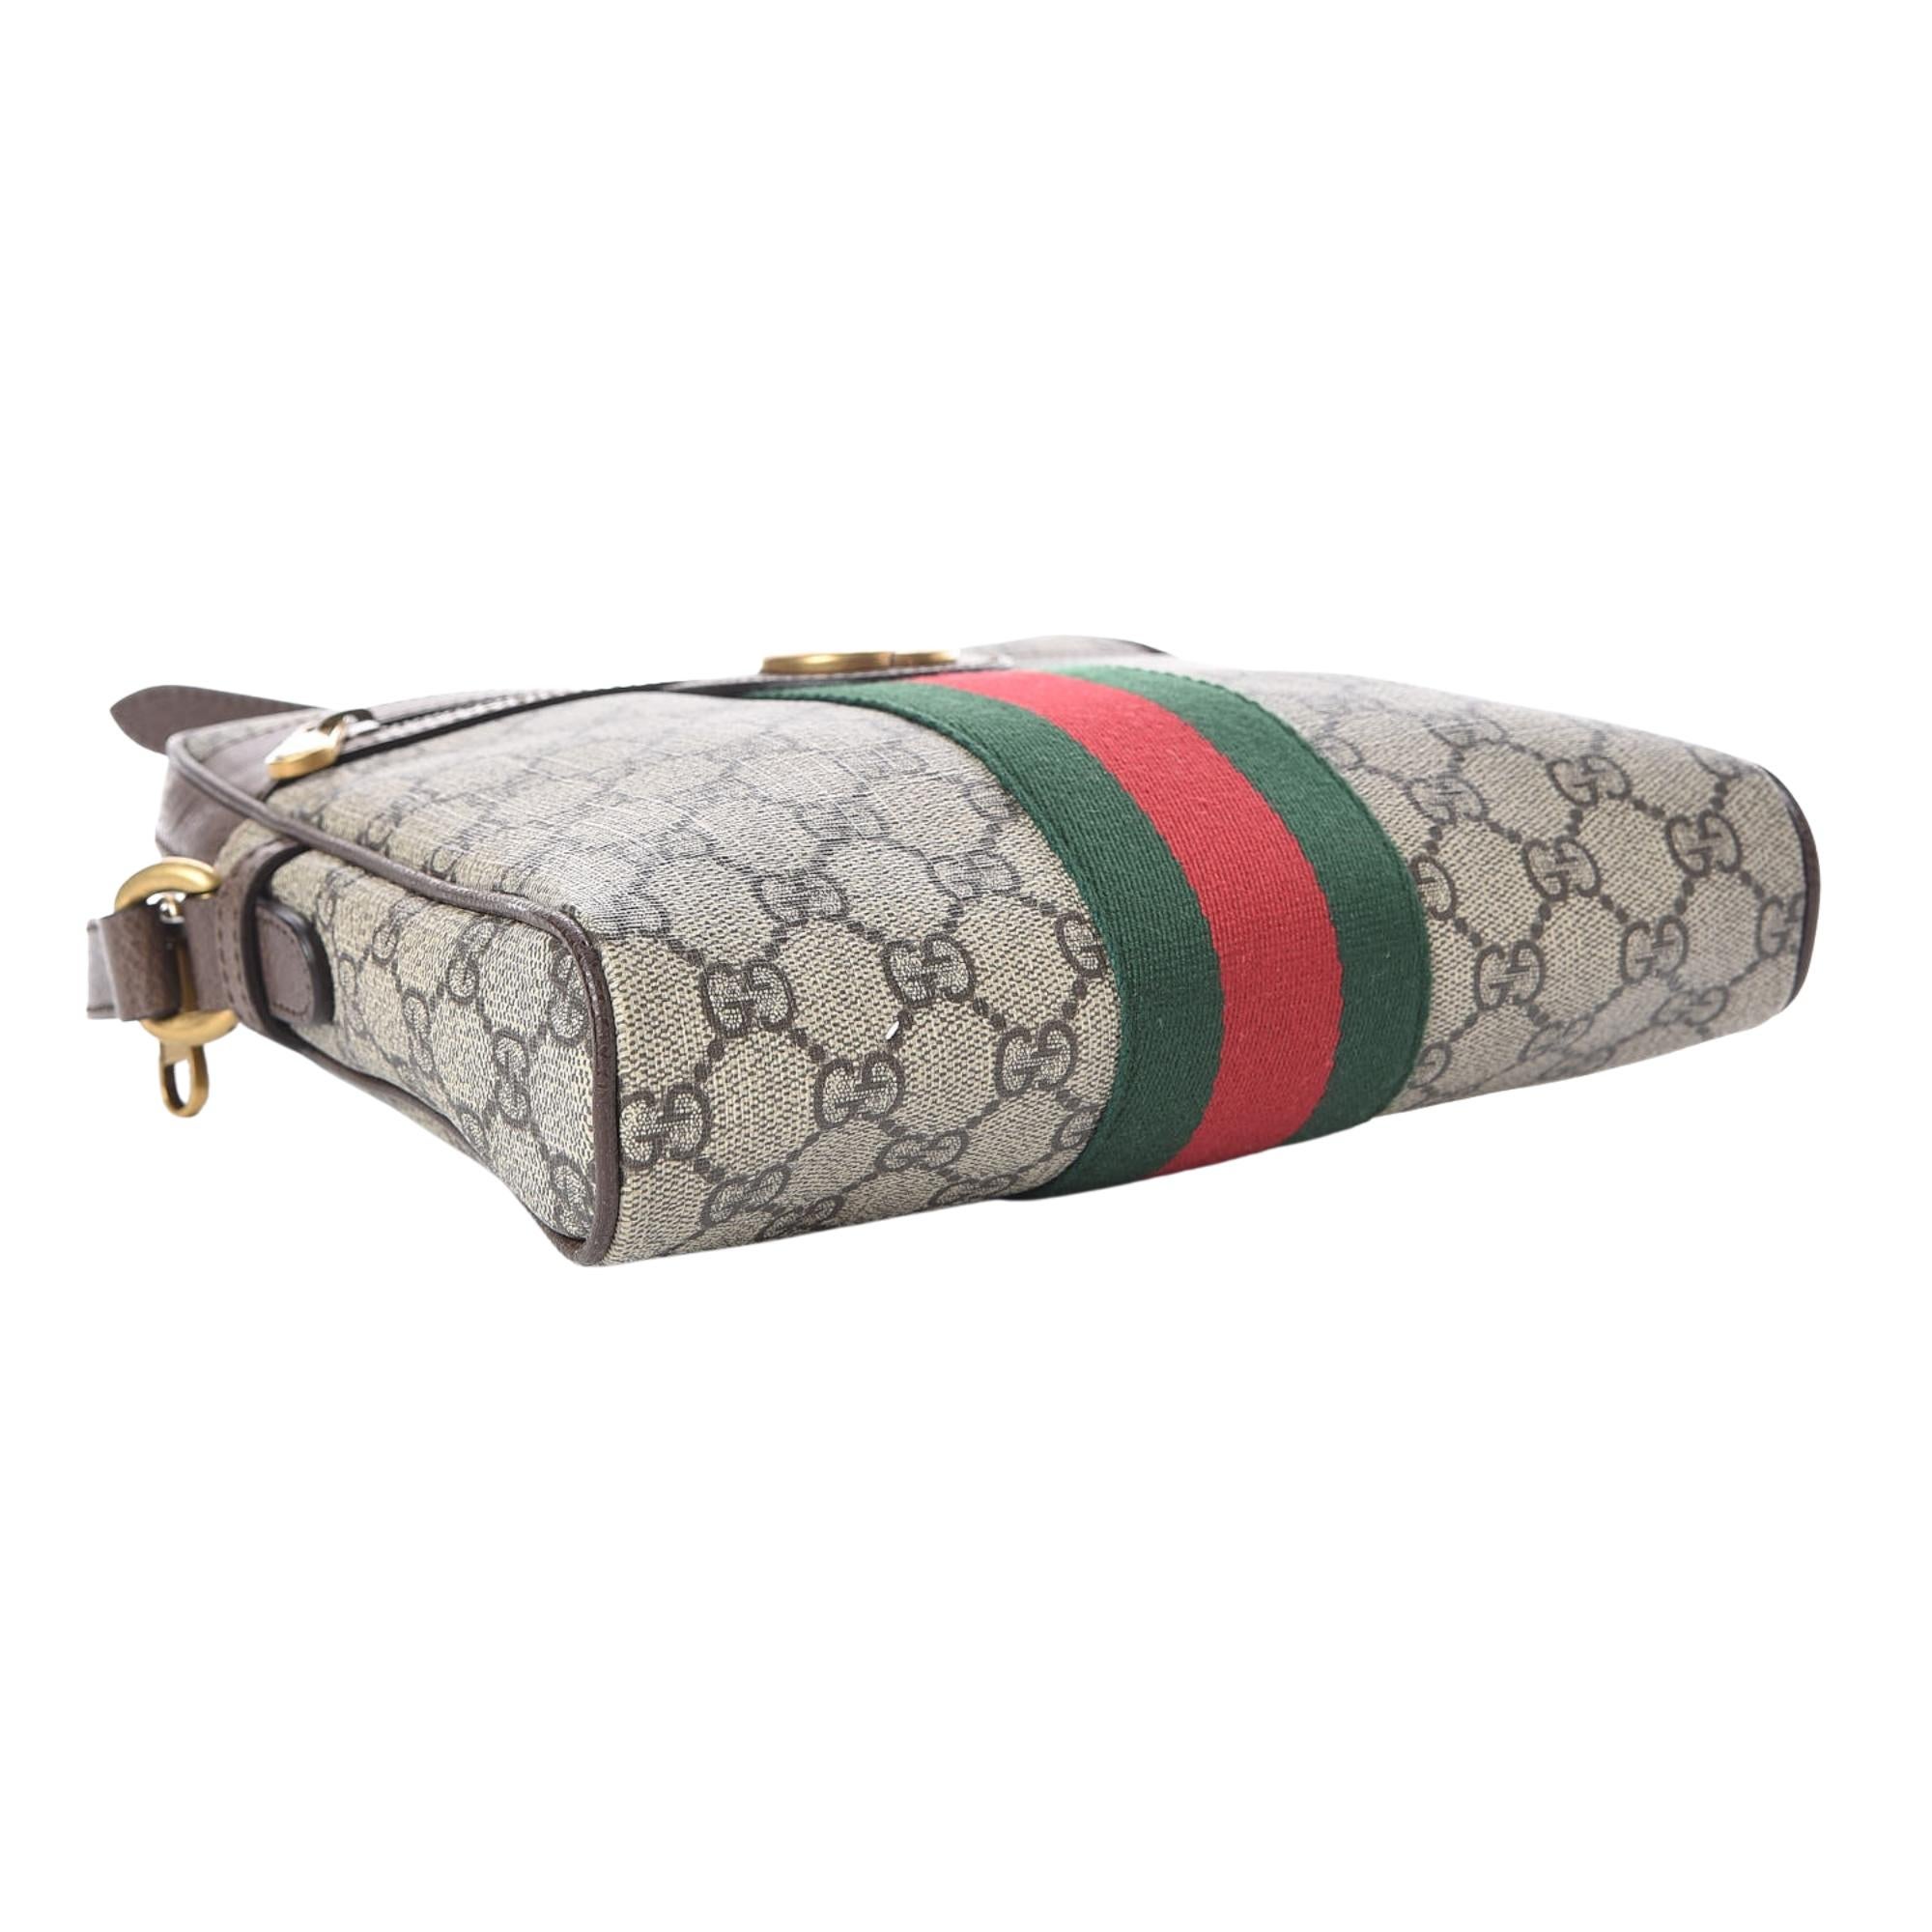 Gucci GG Supreme Monogram Web Small Ophidia Messenger Bag In Excellent Condition For Sale In Montreal, Quebec